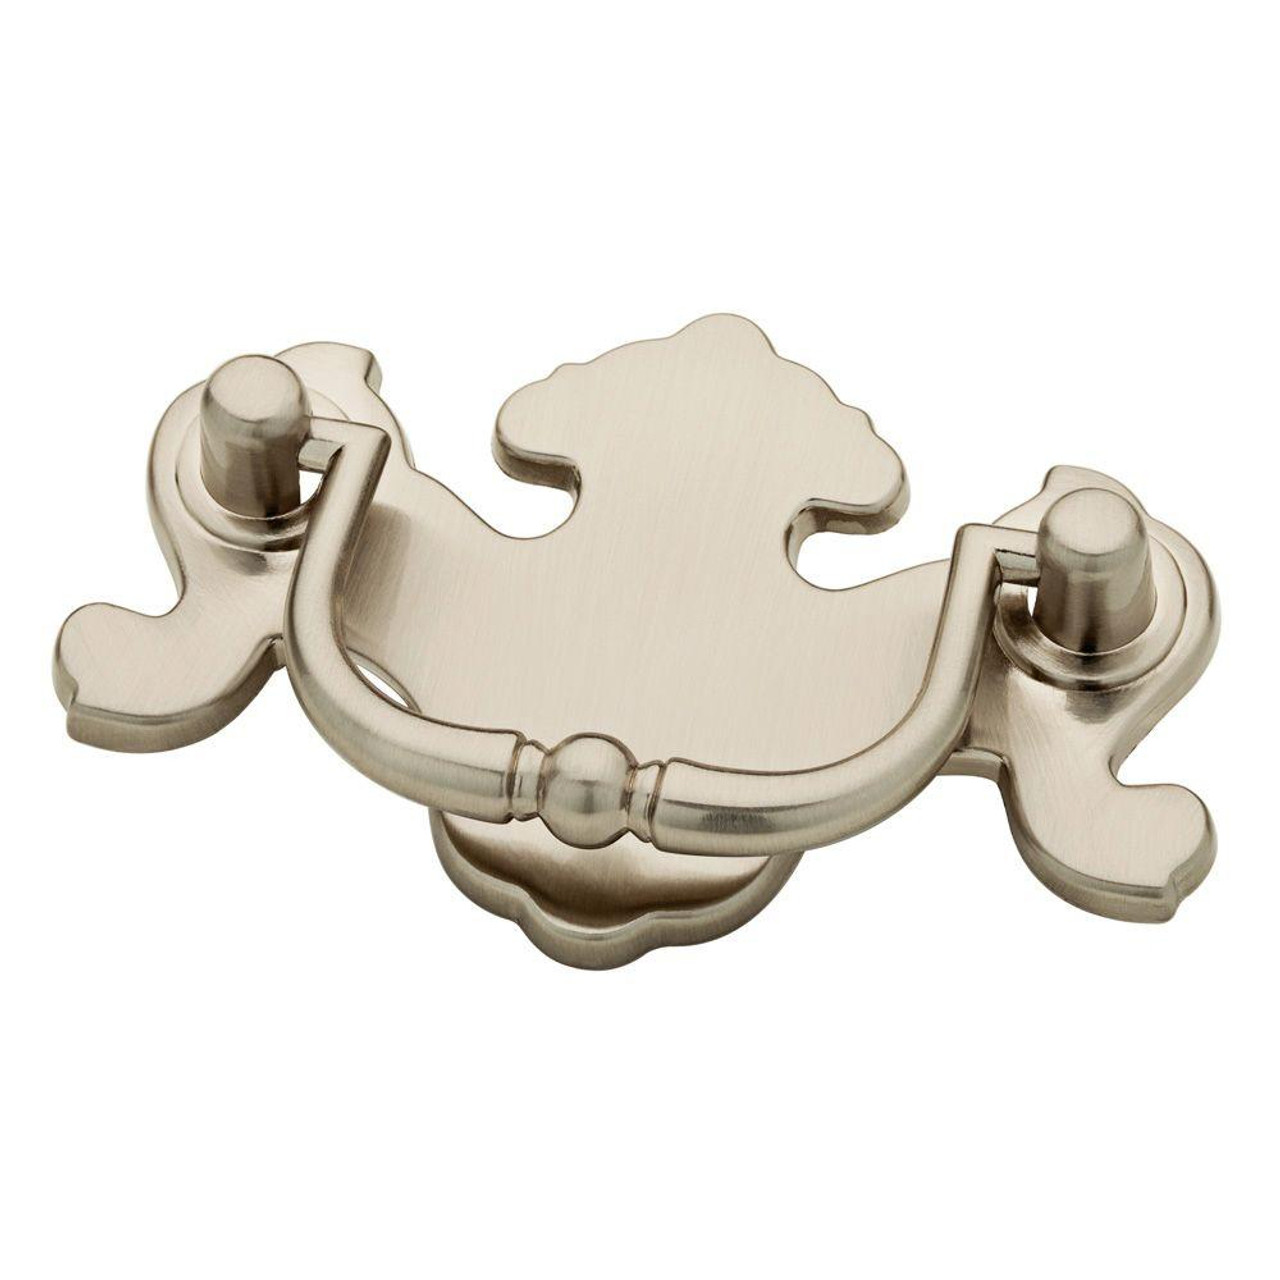 https://cdn11.bigcommerce.com/s-mul8093wwg/images/stencil/1280x1280/products/17294/39577/satin-nickel-bail-pull-traditional-chippendale-style-2-1-2-c-c-2__91347.1658501080.jpg?c=1